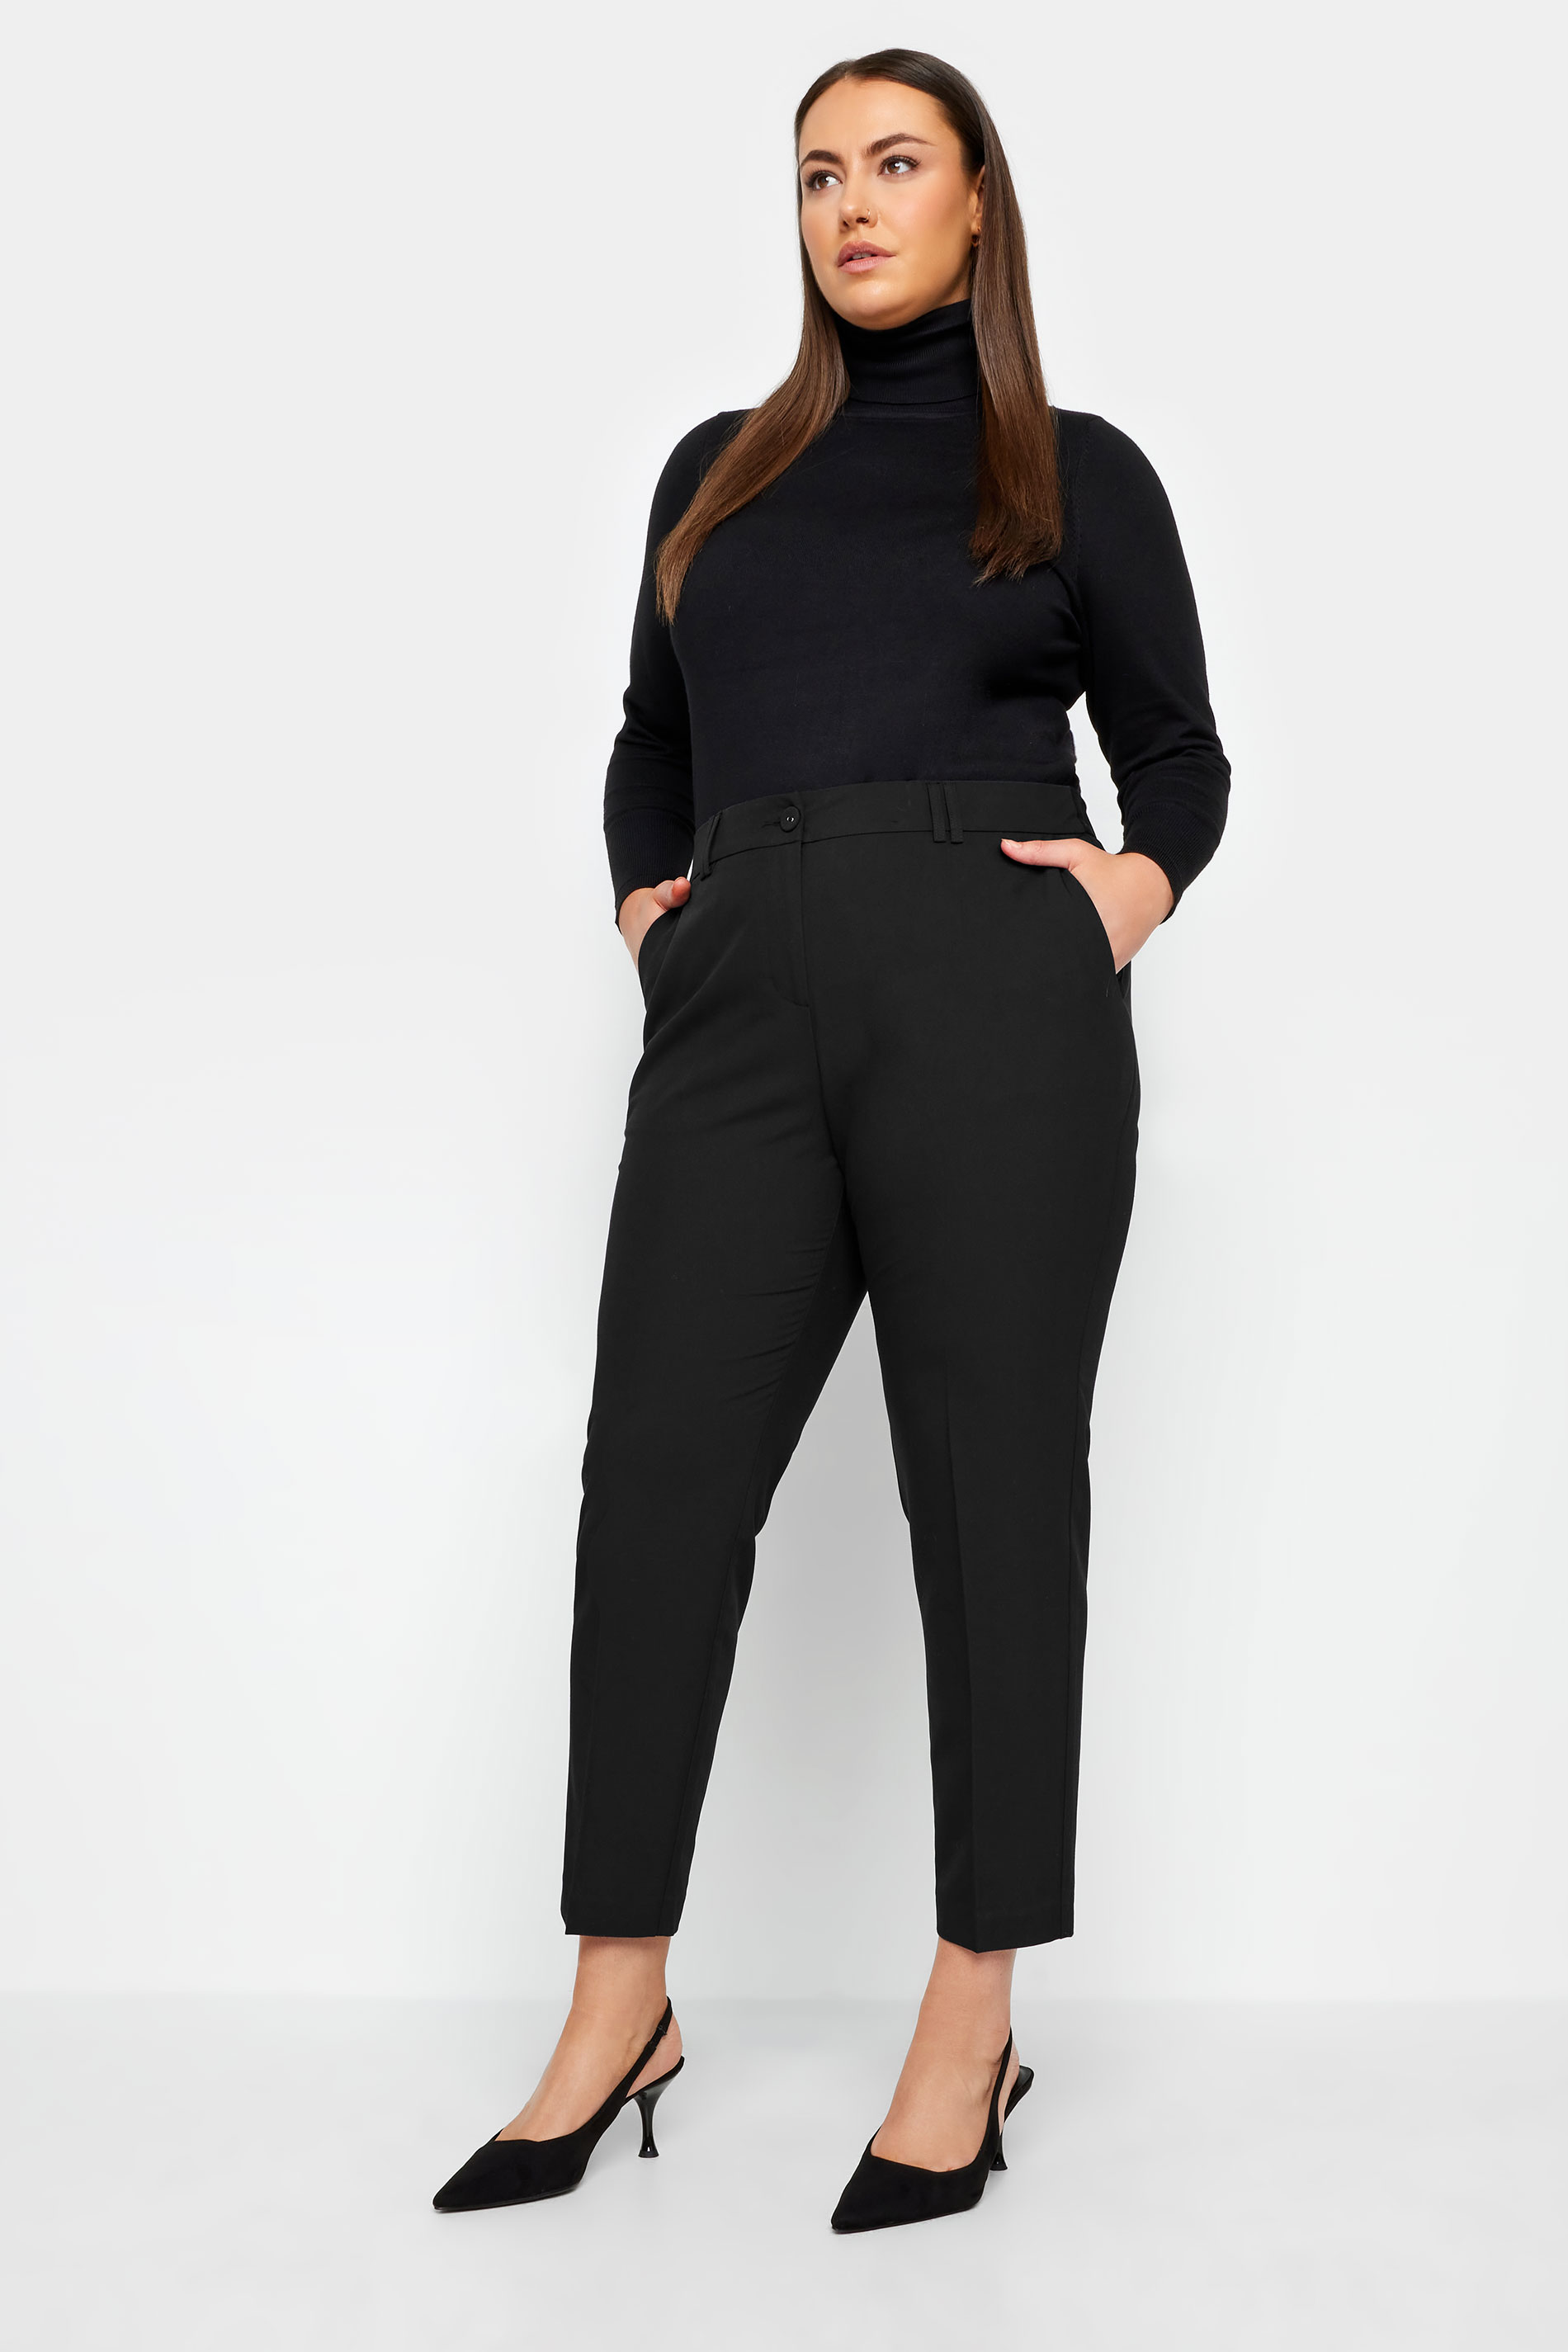 Evans Black High Waisted Slim Fit Trousers 2